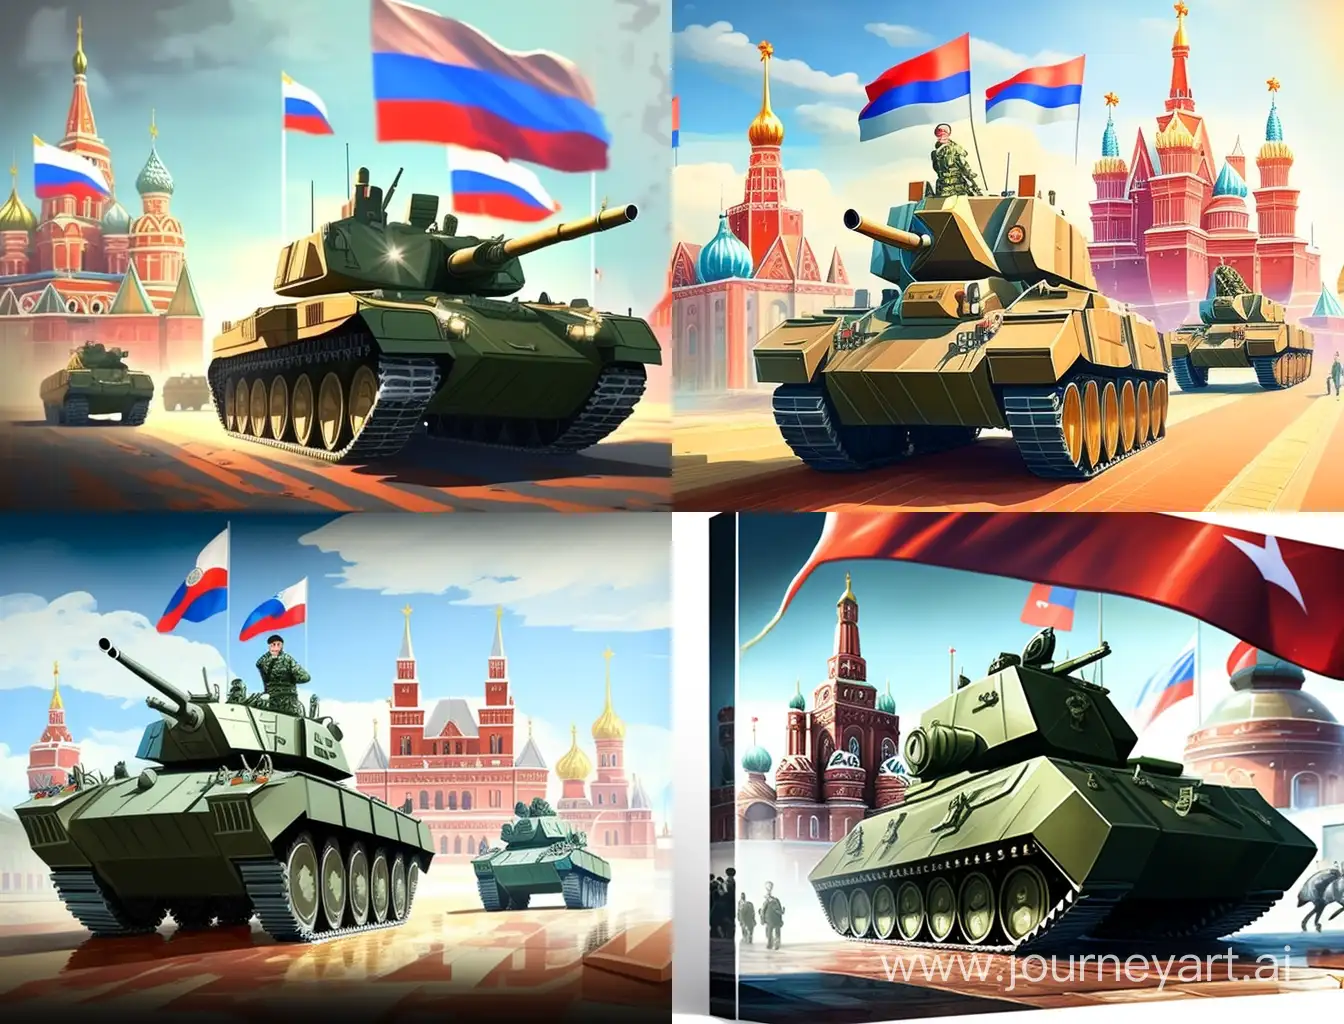 Russian-Victory-Parade-with-Kremlin-Background-Military-Equipment-Demonstration-in-3D